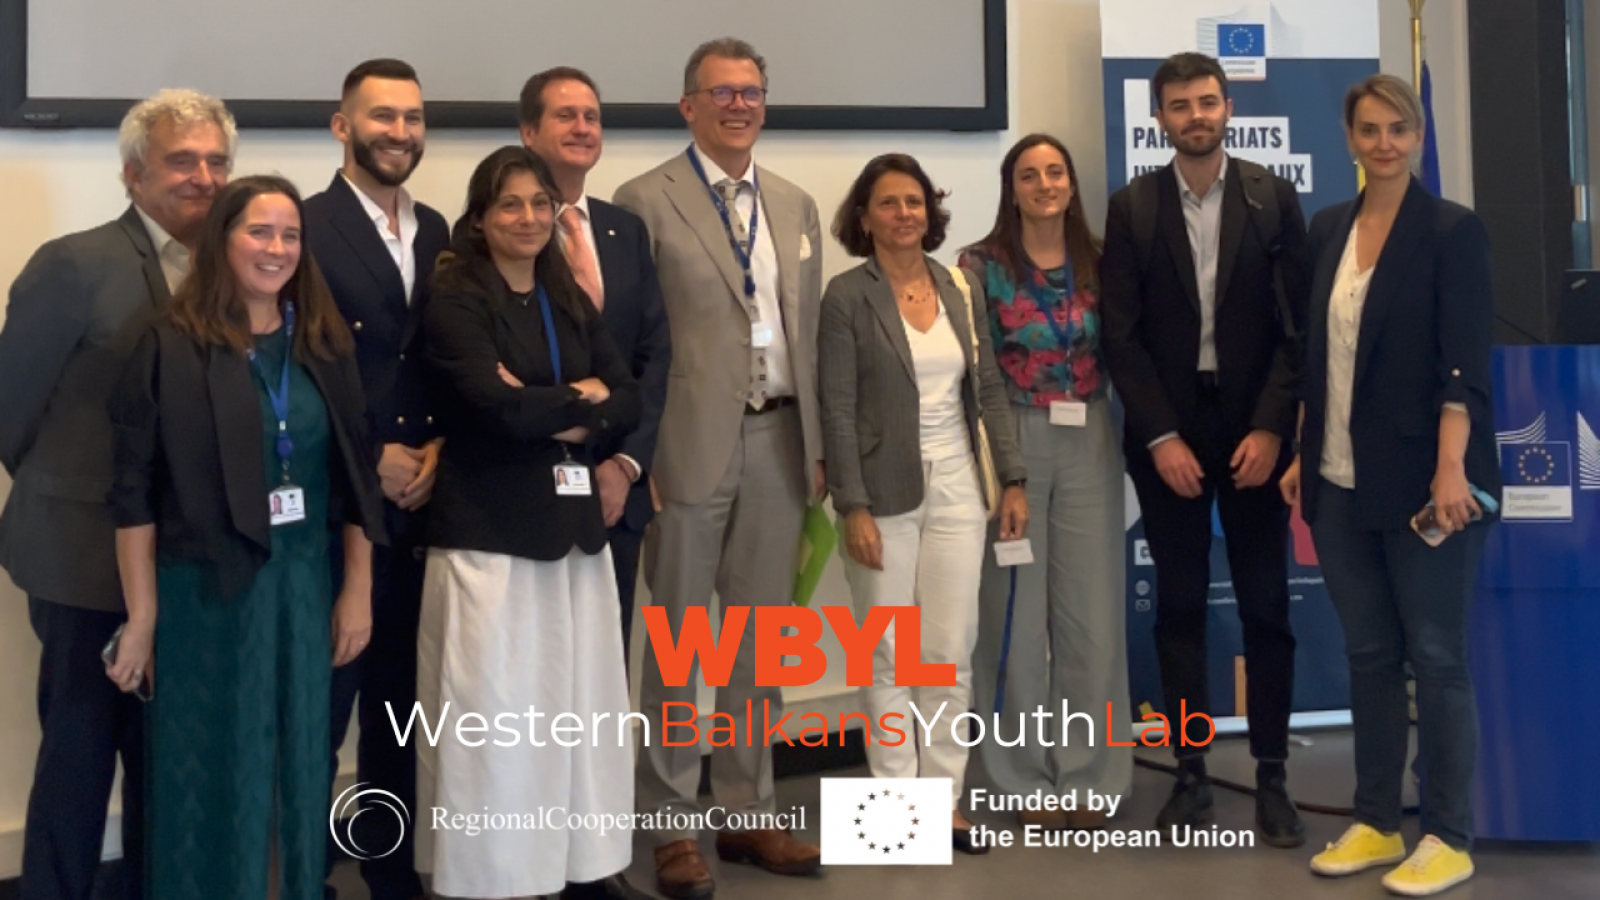 Western Balkans Youth Lab 👉🏻 trendsetter among #EU-funded projects when it comes to good practices